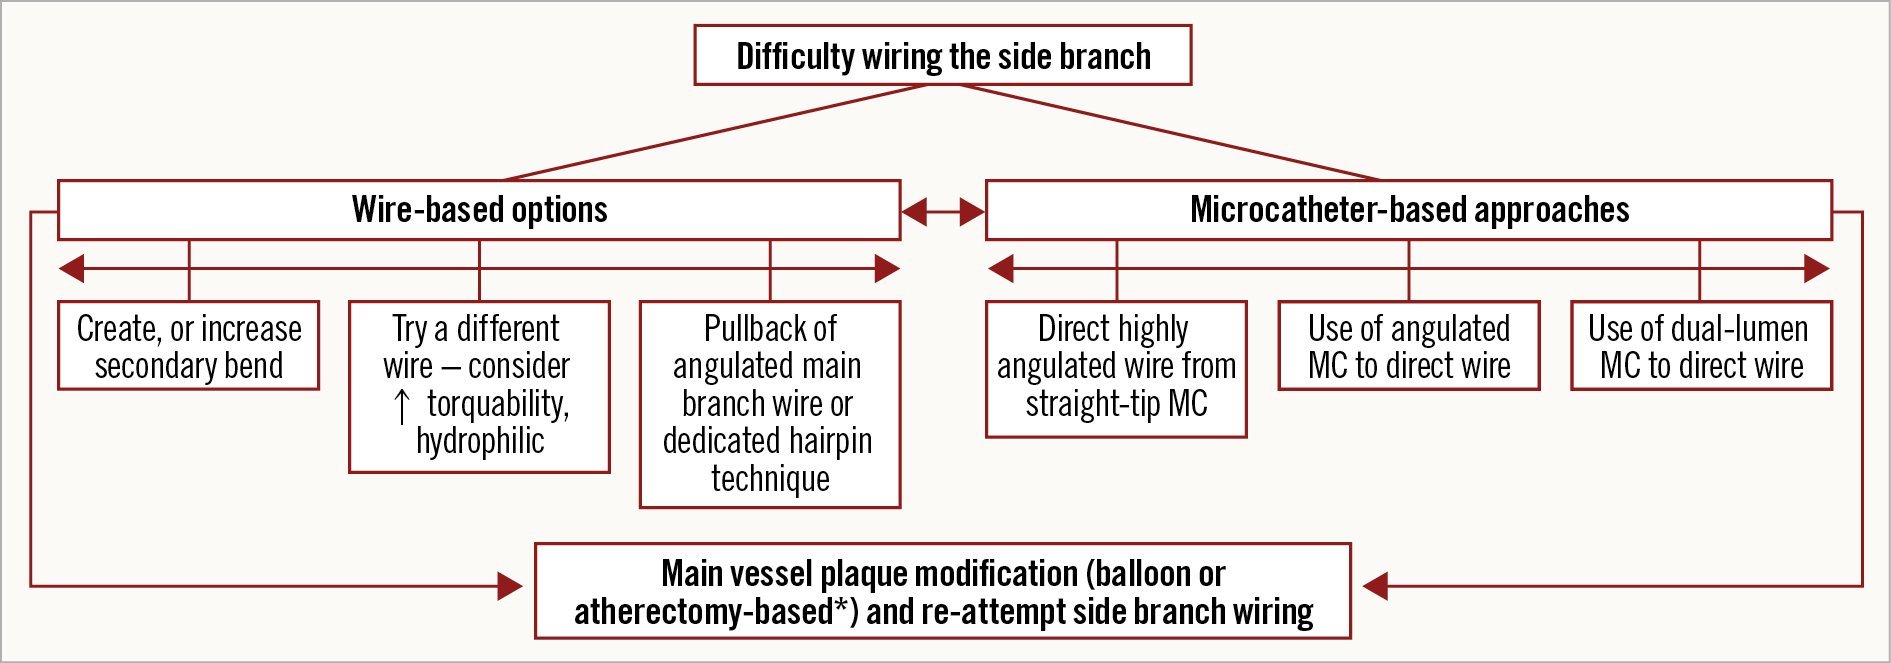 Figure 3. Algorithm for approaching a side branch which is difficult to wire. *atherectomy only if no new stents yet placed. MC: microcatheter